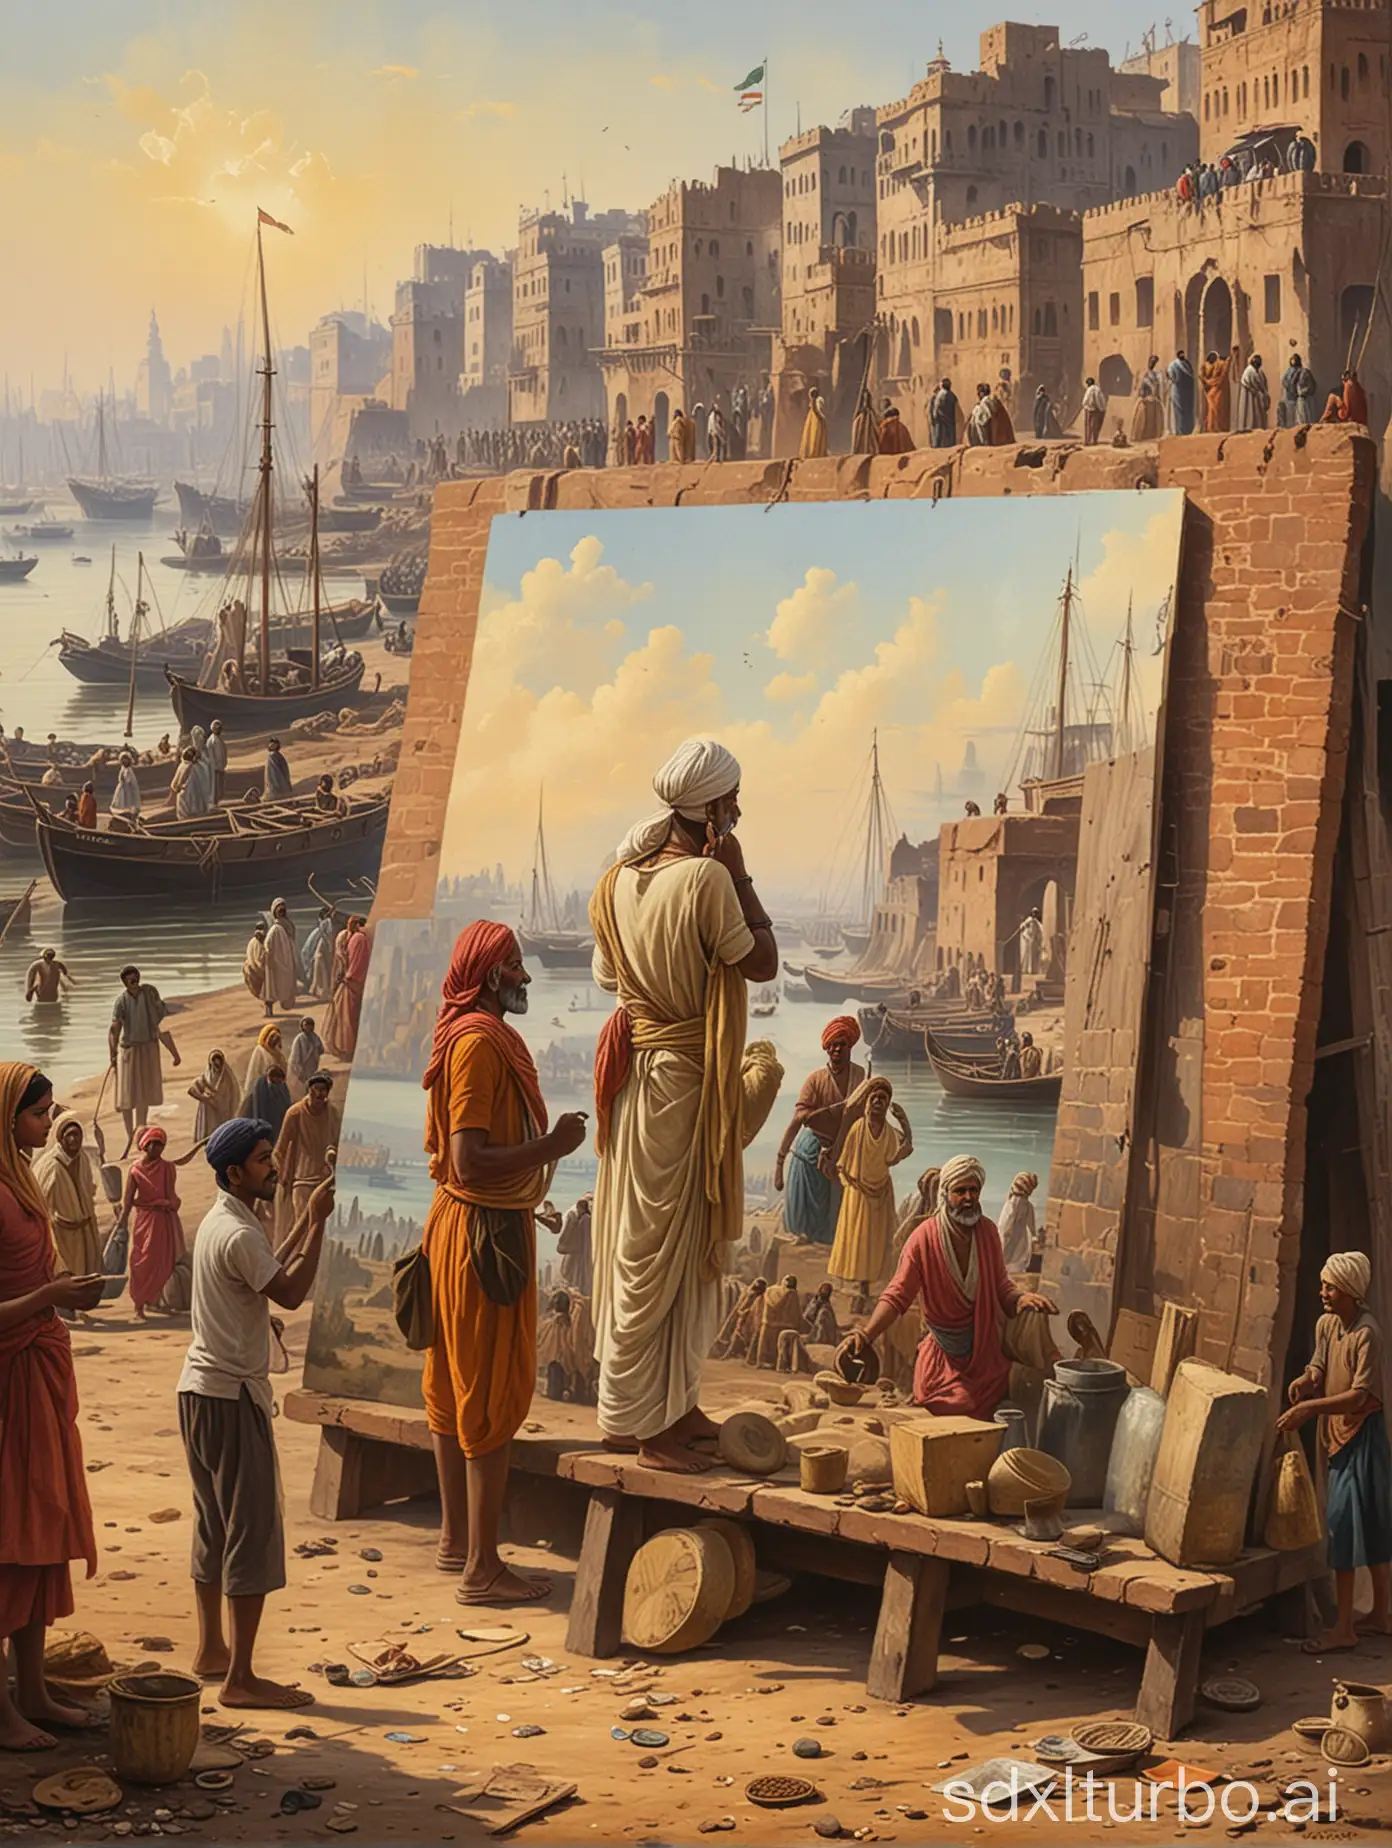 make old India looks rich from 1700, people working near port site, painting